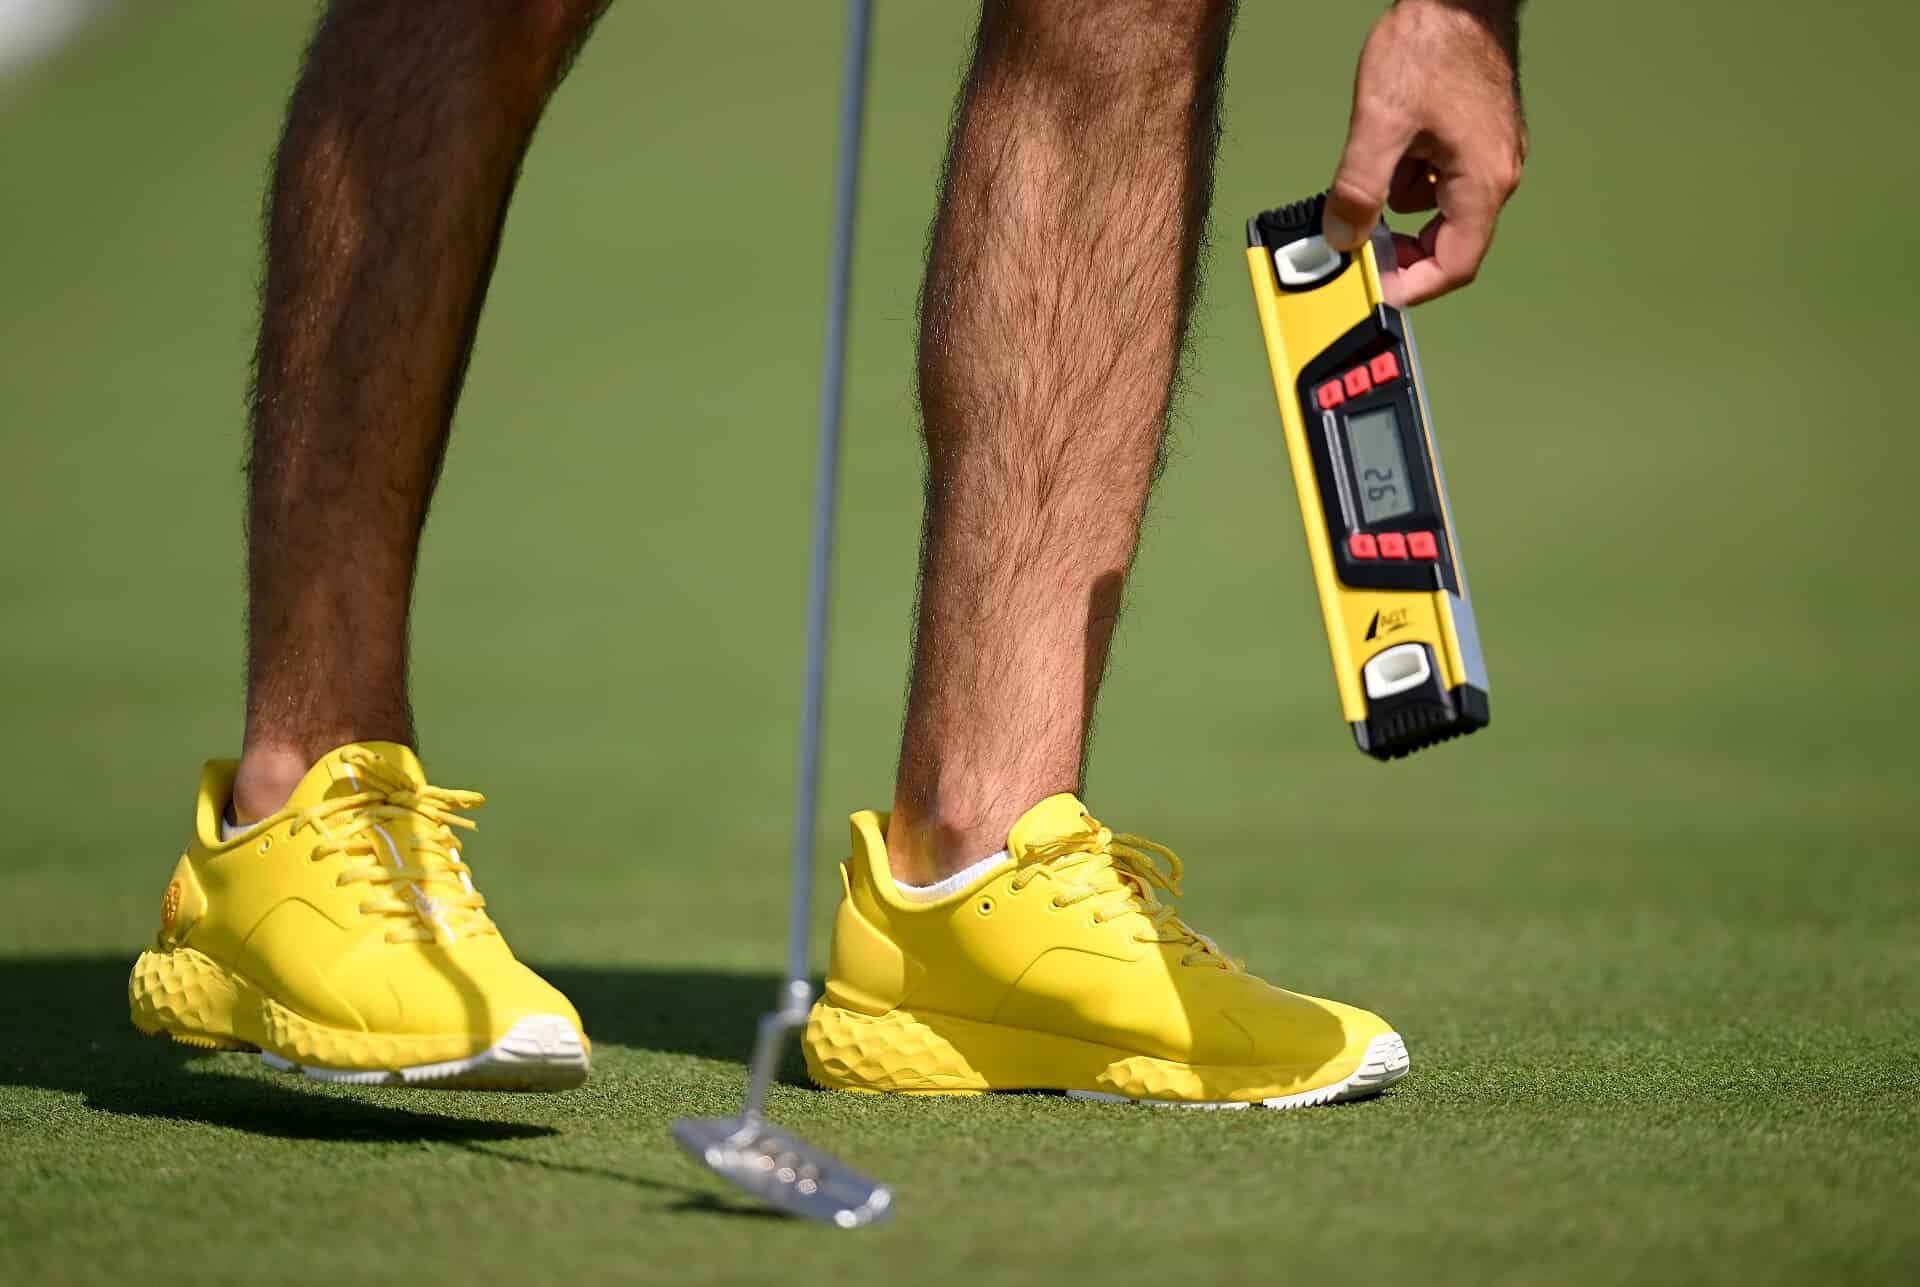 Can you use a spirit level to measure slope on a green?